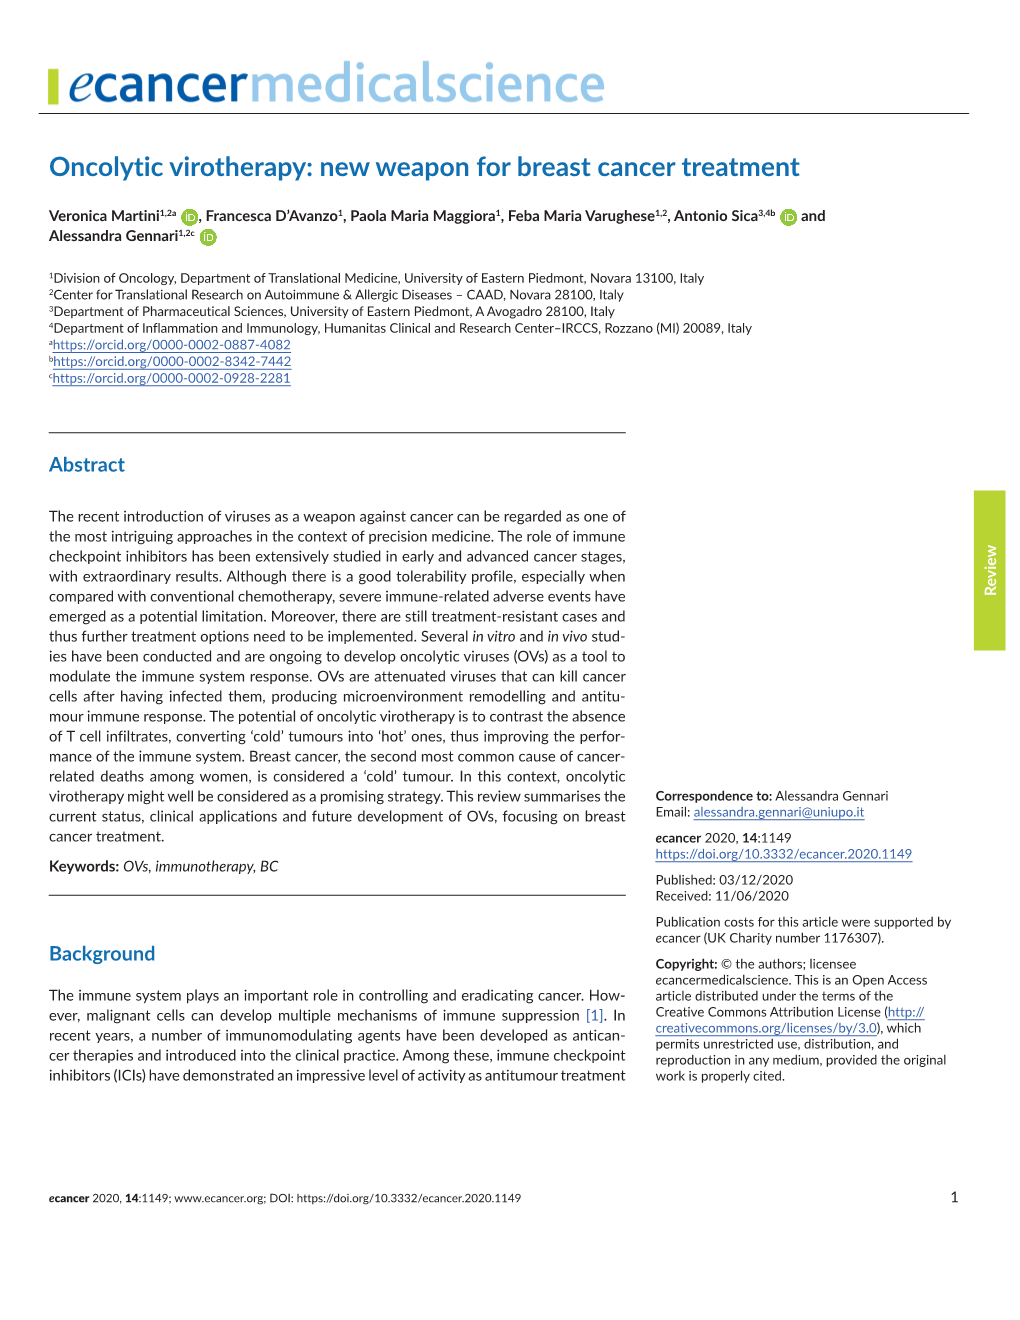 Oncolytic Virotherapy: New Weapon for Breast Cancer Treatment